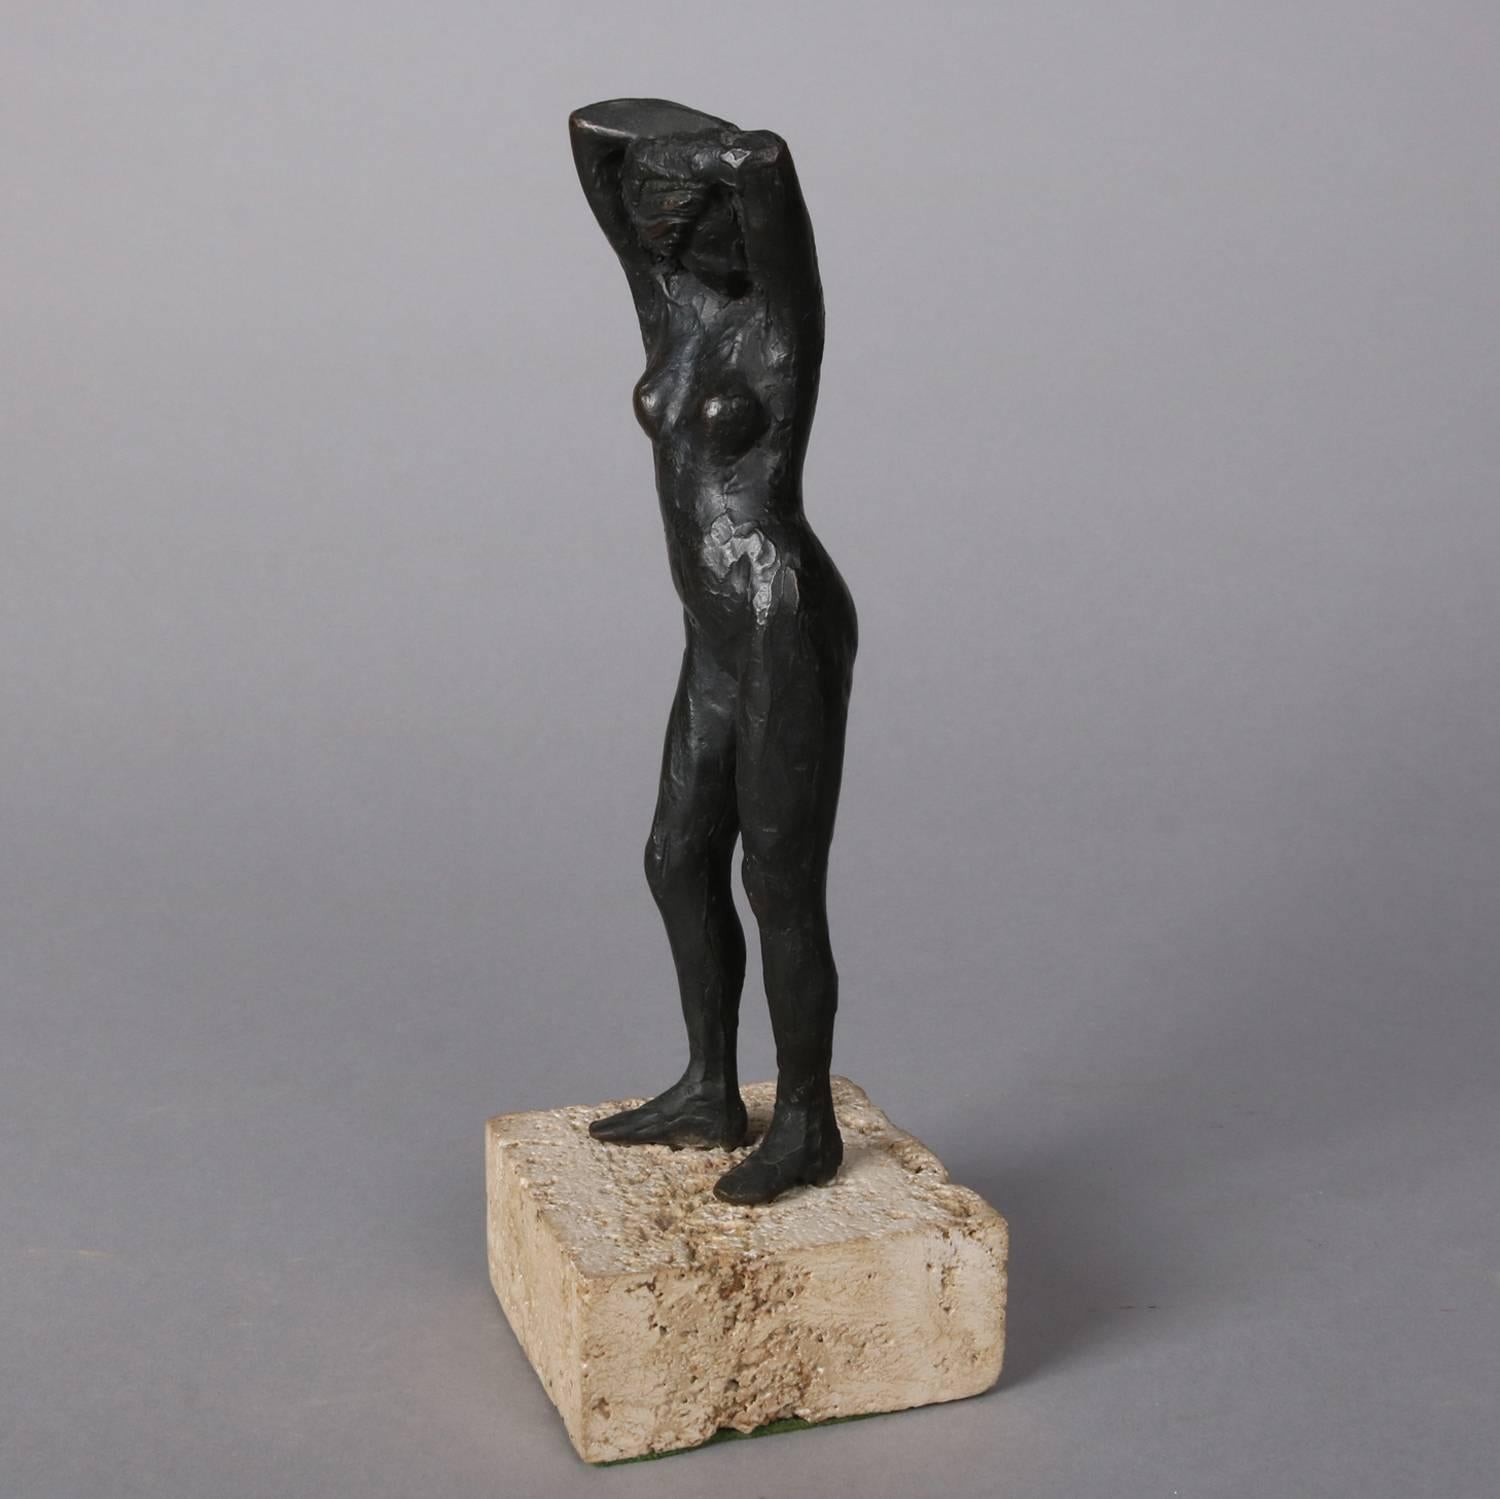 Abstract figural bronze statue depicts full length portrait sculpture of nude woman, 20th century

Measures - 8.5